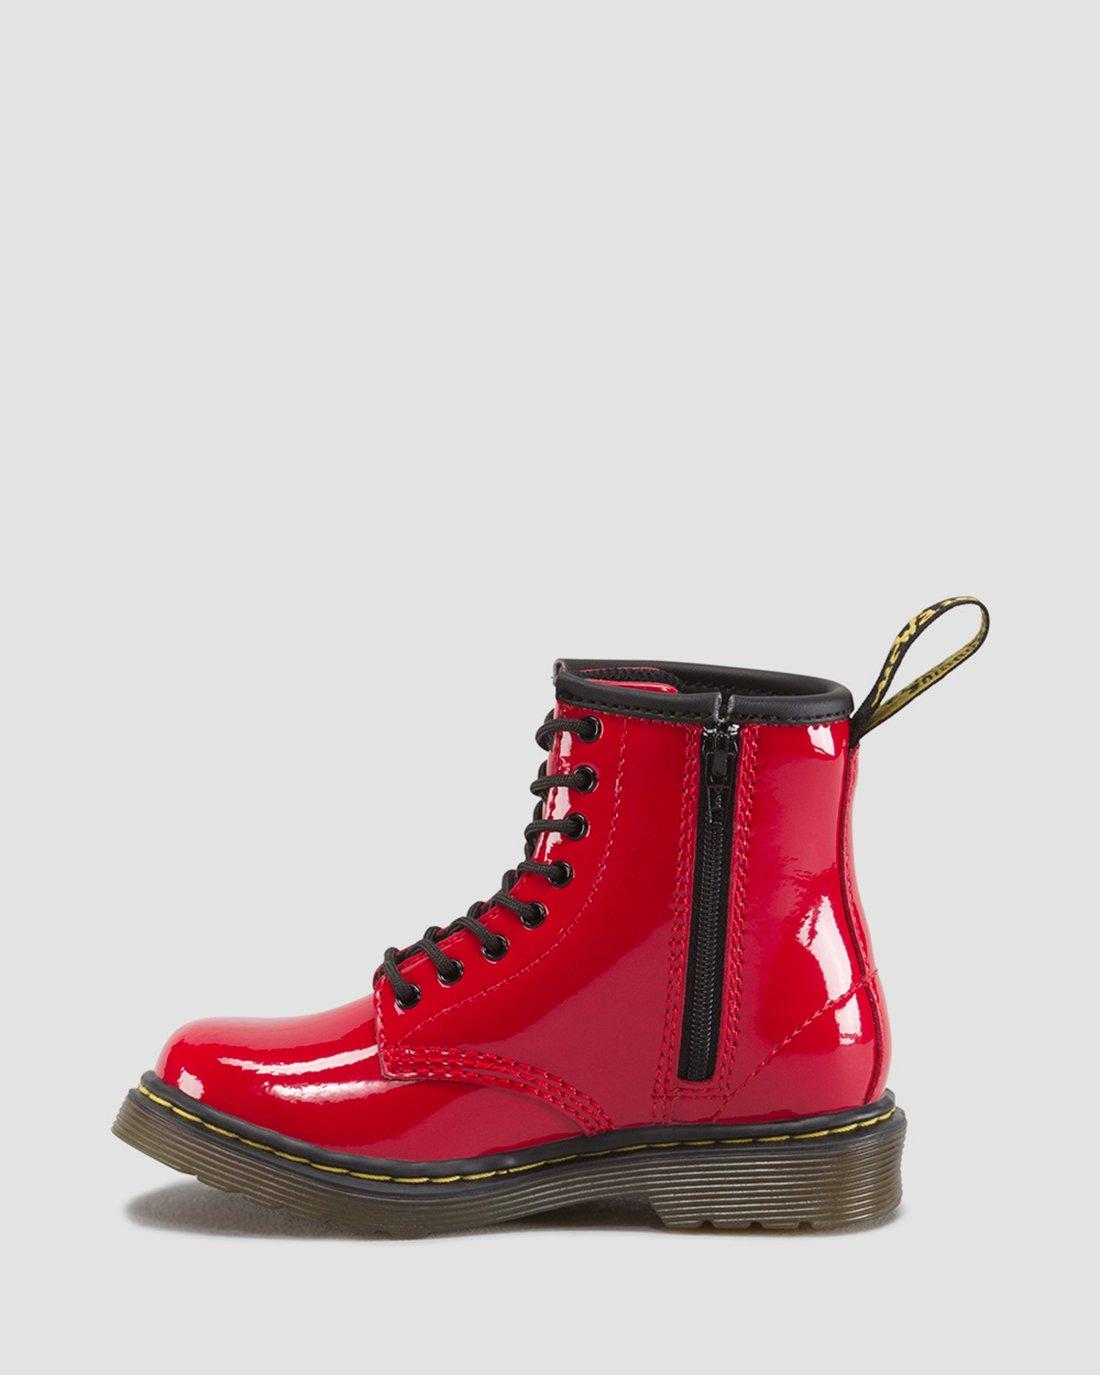 Toddler 1460 Patent Leather Lace Up Boots in Red